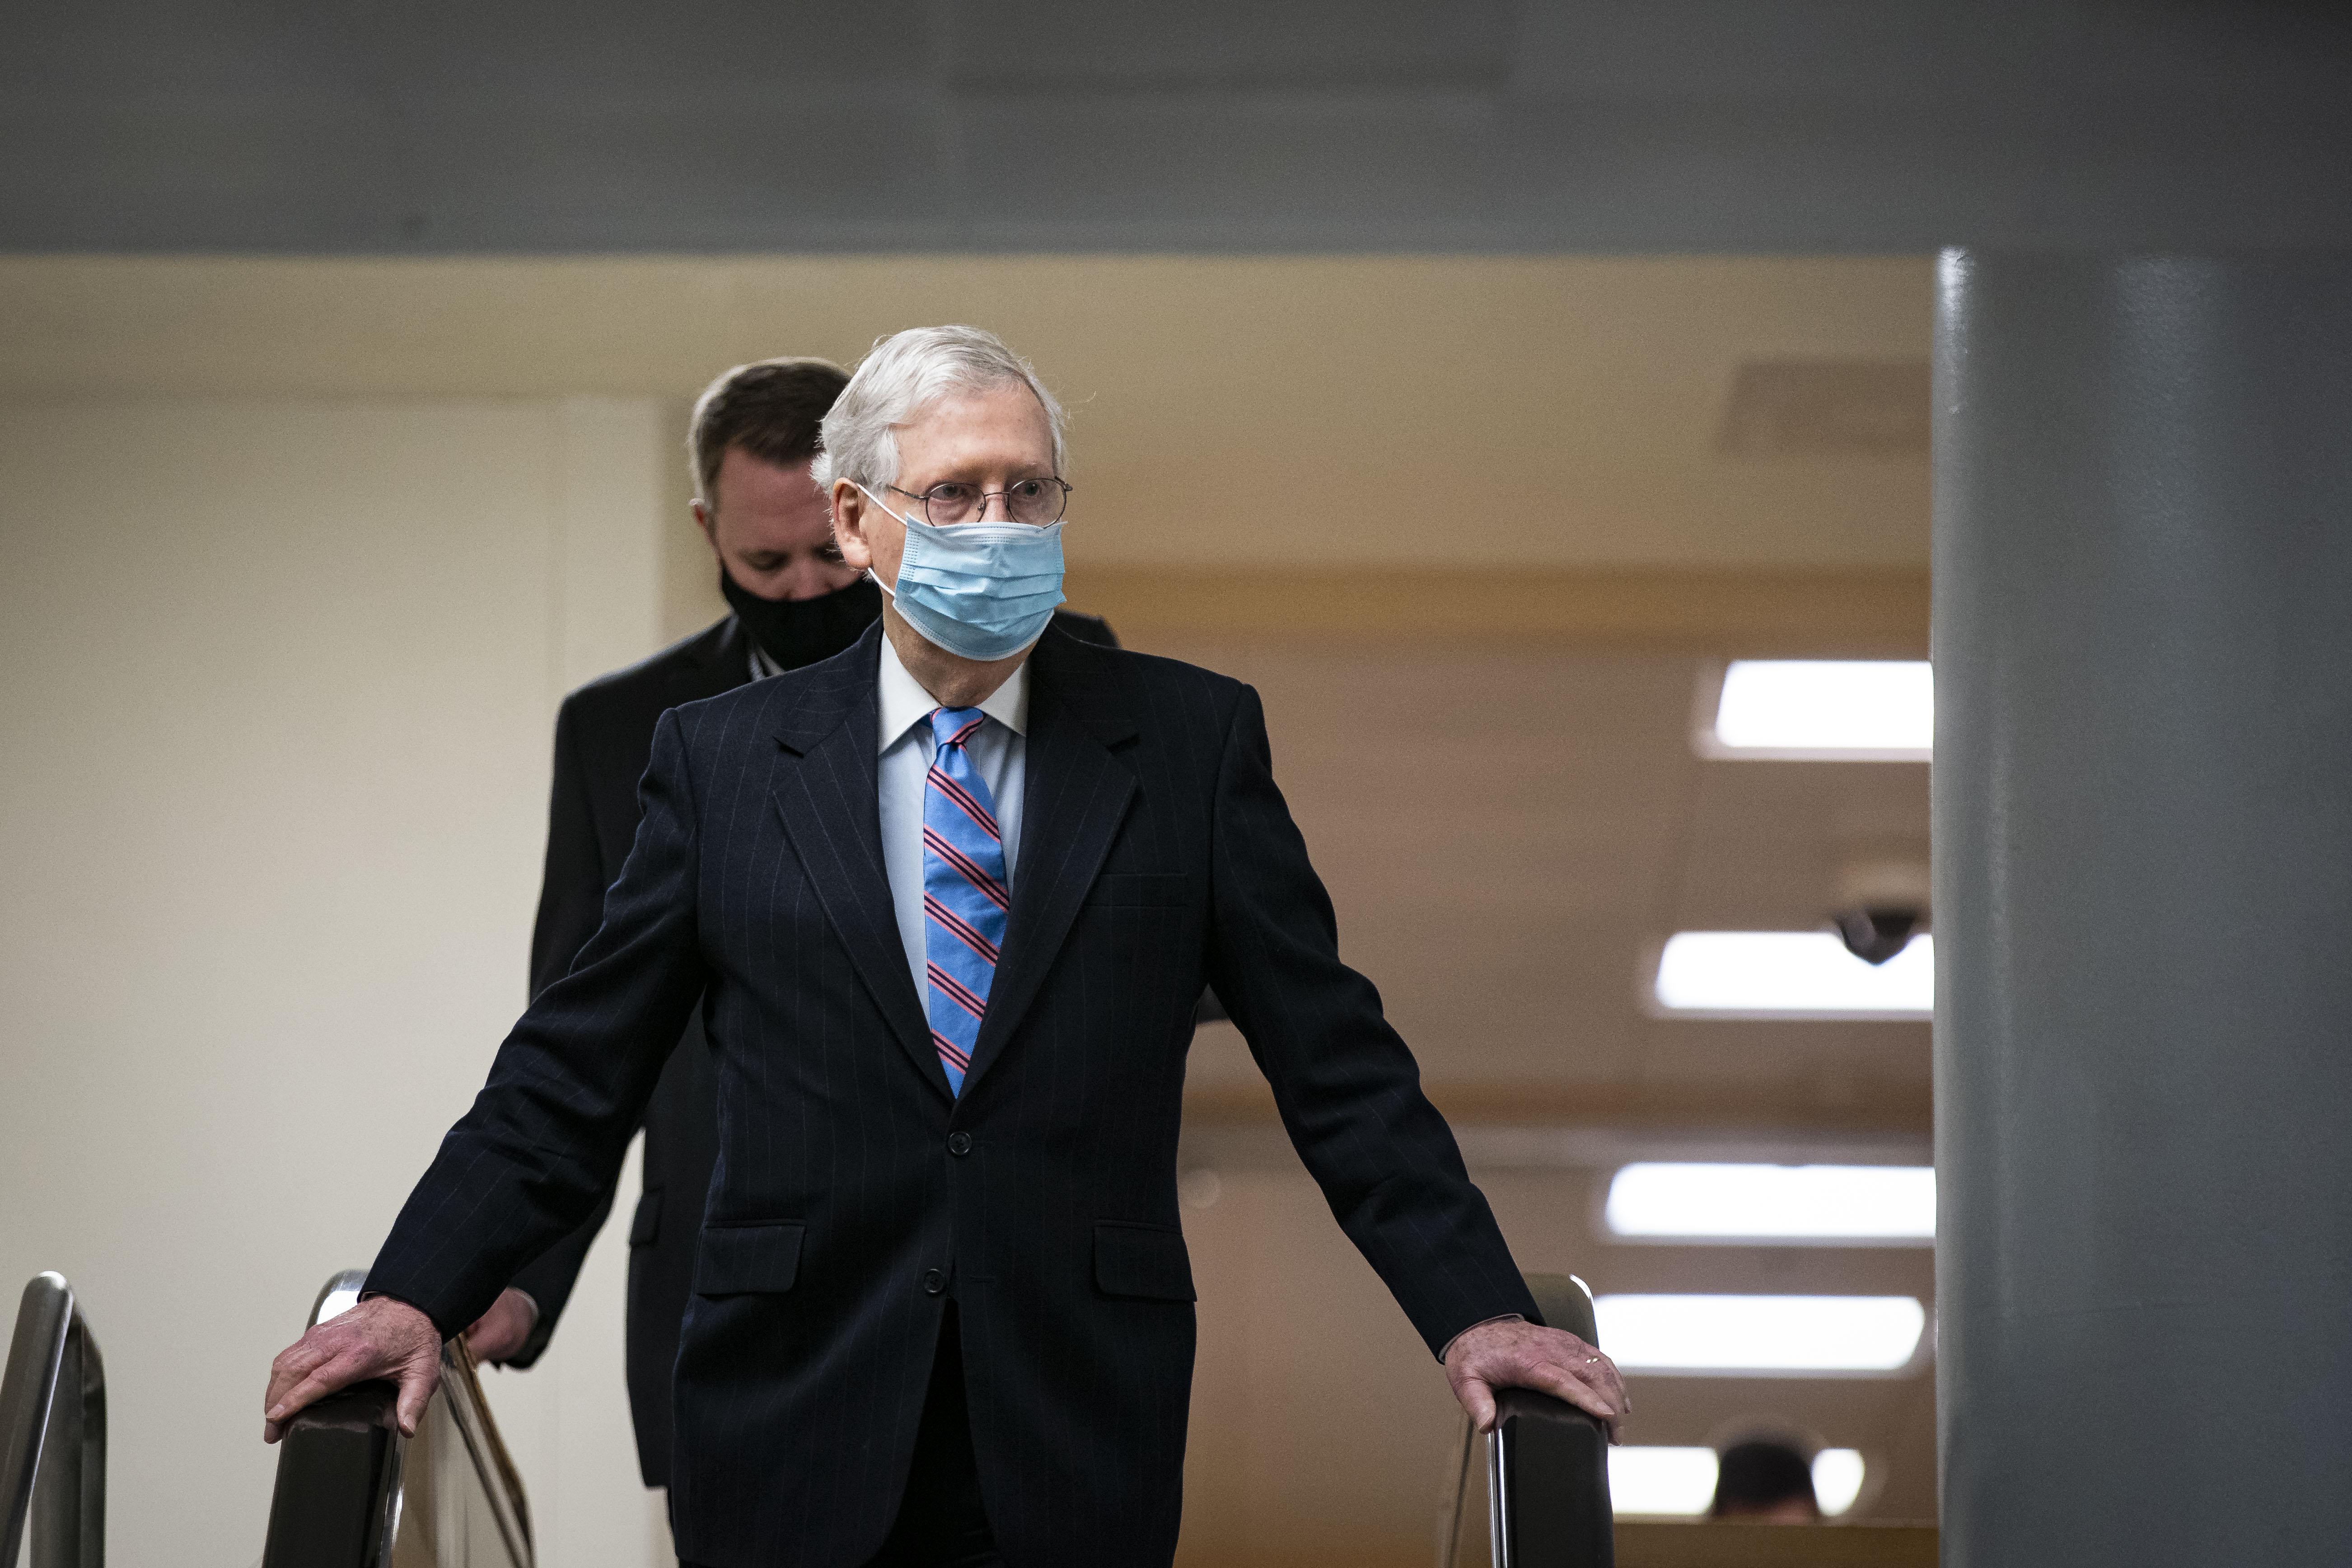 McConnell, wearing a mask, holds the handrails of an escalator down to the subway of the U.S. Capitol